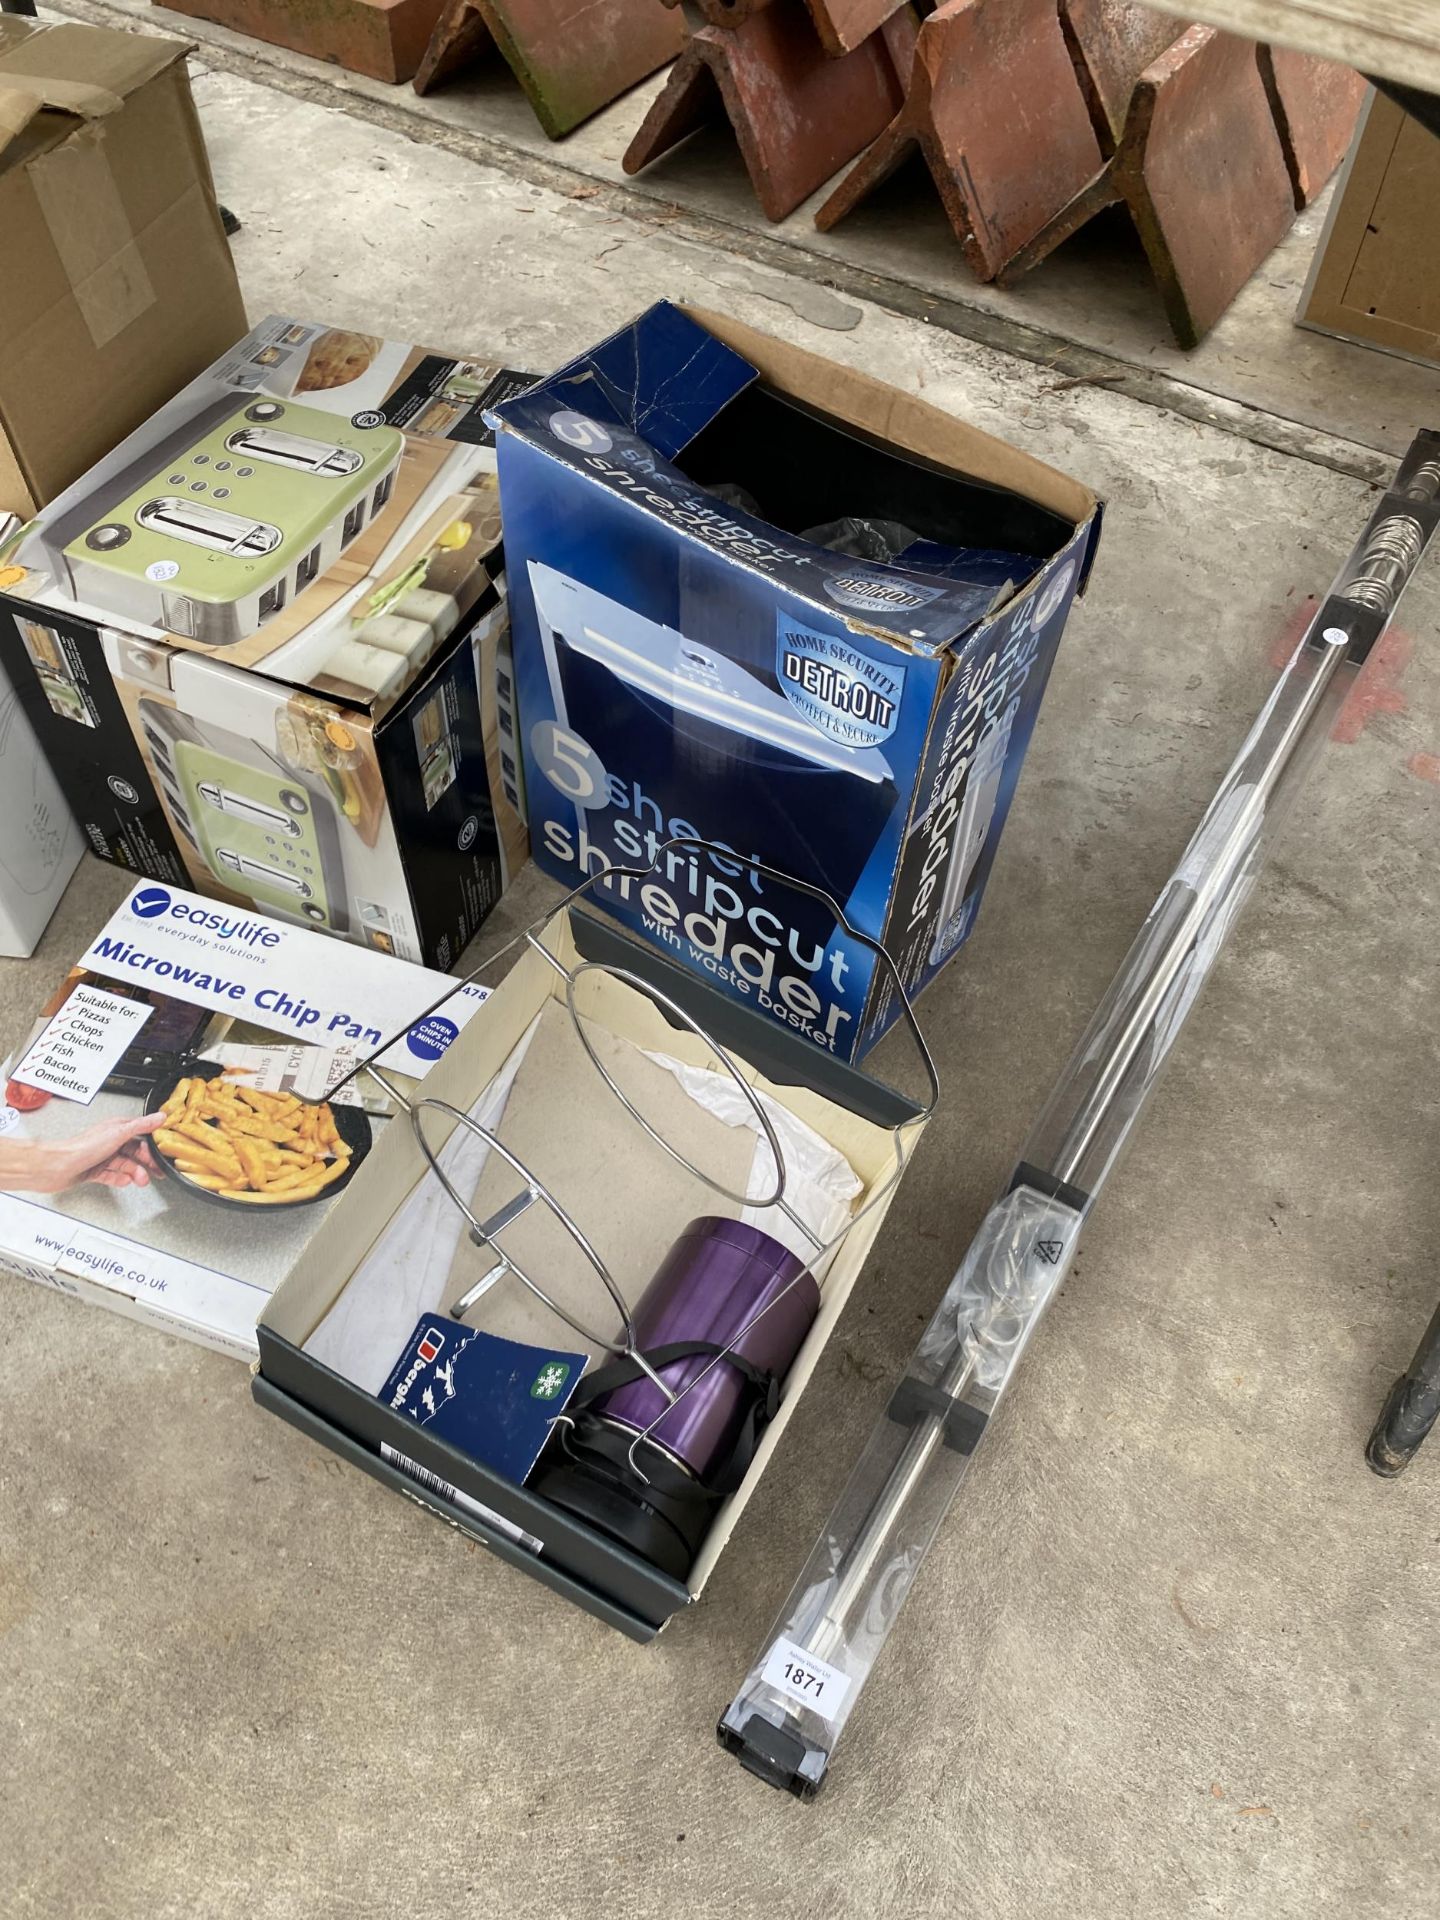 AN ASSORTMENT OF ITEMS TO INCLUDE A TOASTER, MICROWAVE CHIP PAN AND A SHREDDER ETC - Image 2 of 5